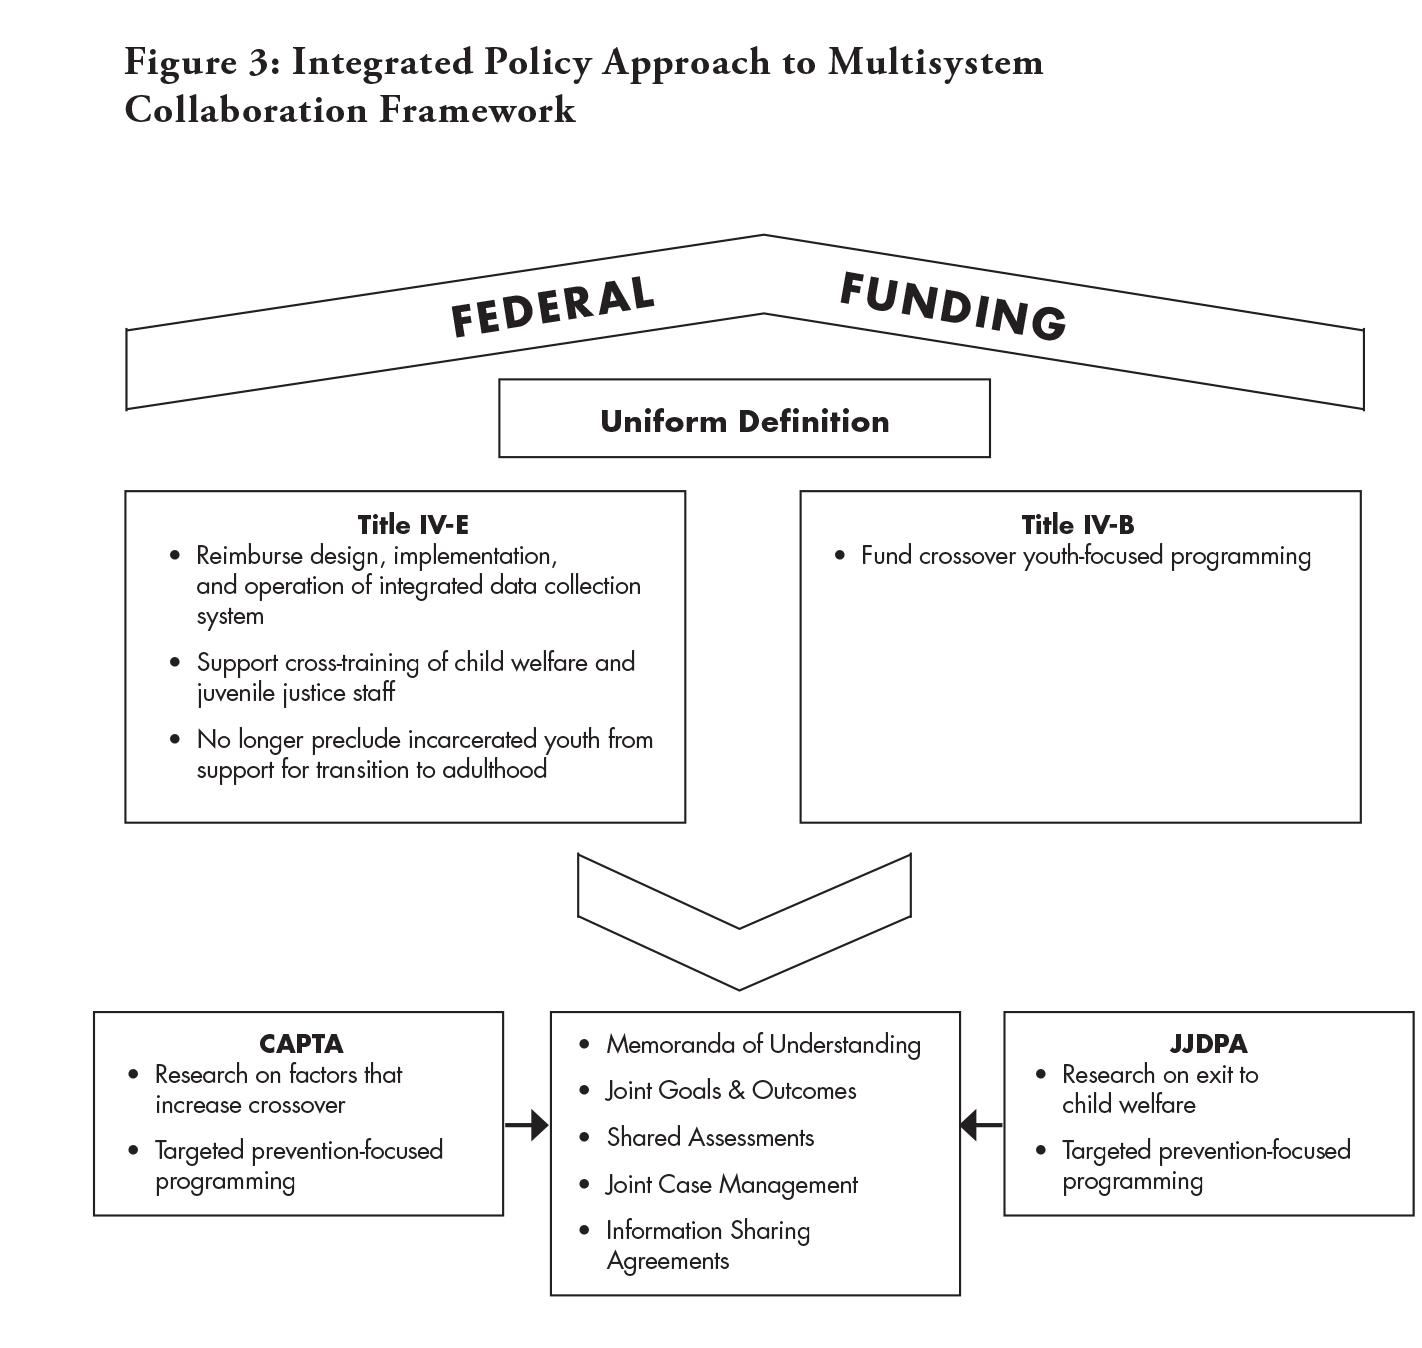 Figure 3: Integrated Policy Approach to Multisystem Collaboration Framework